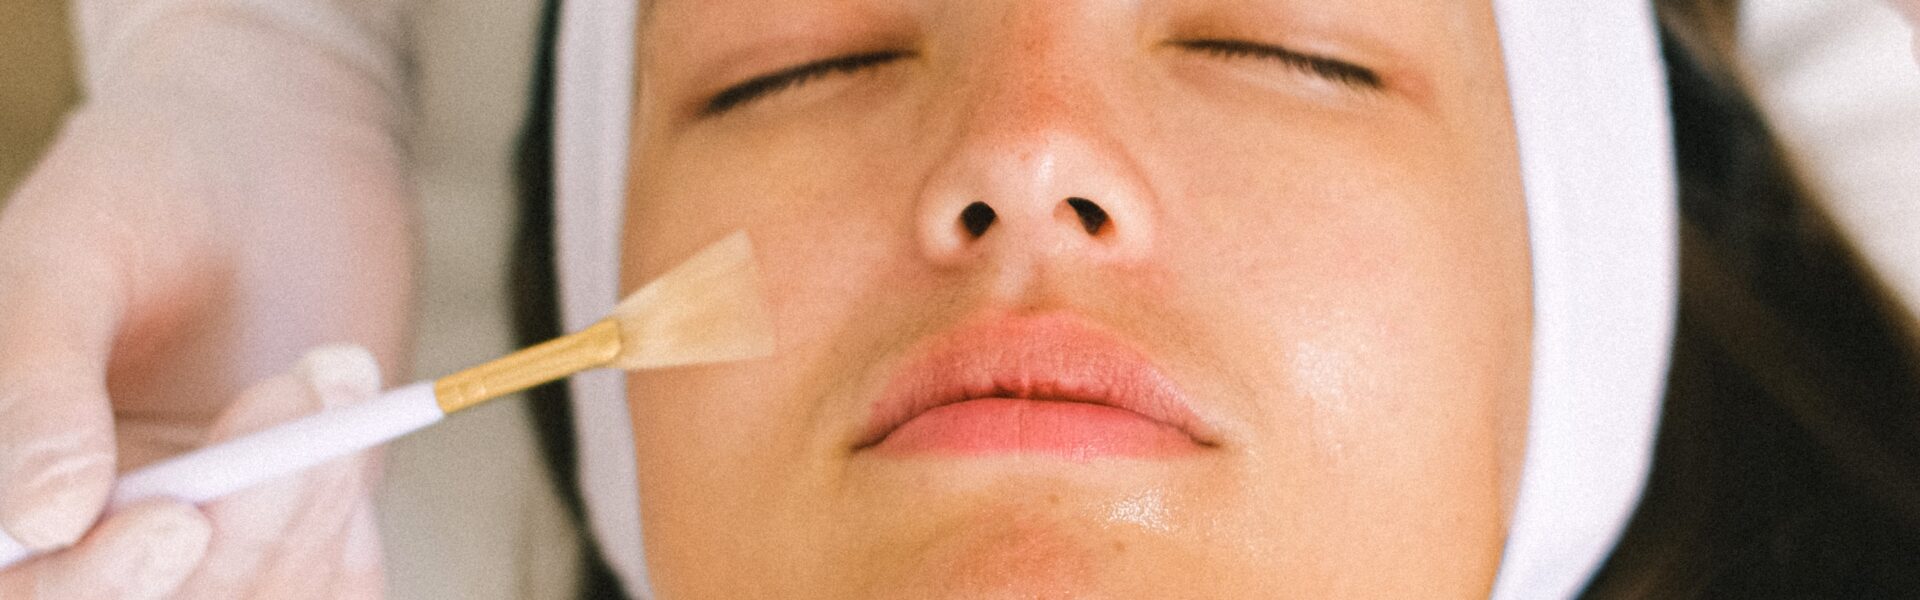 New year, new face – benefits of getting a chemical peel!￼ banner